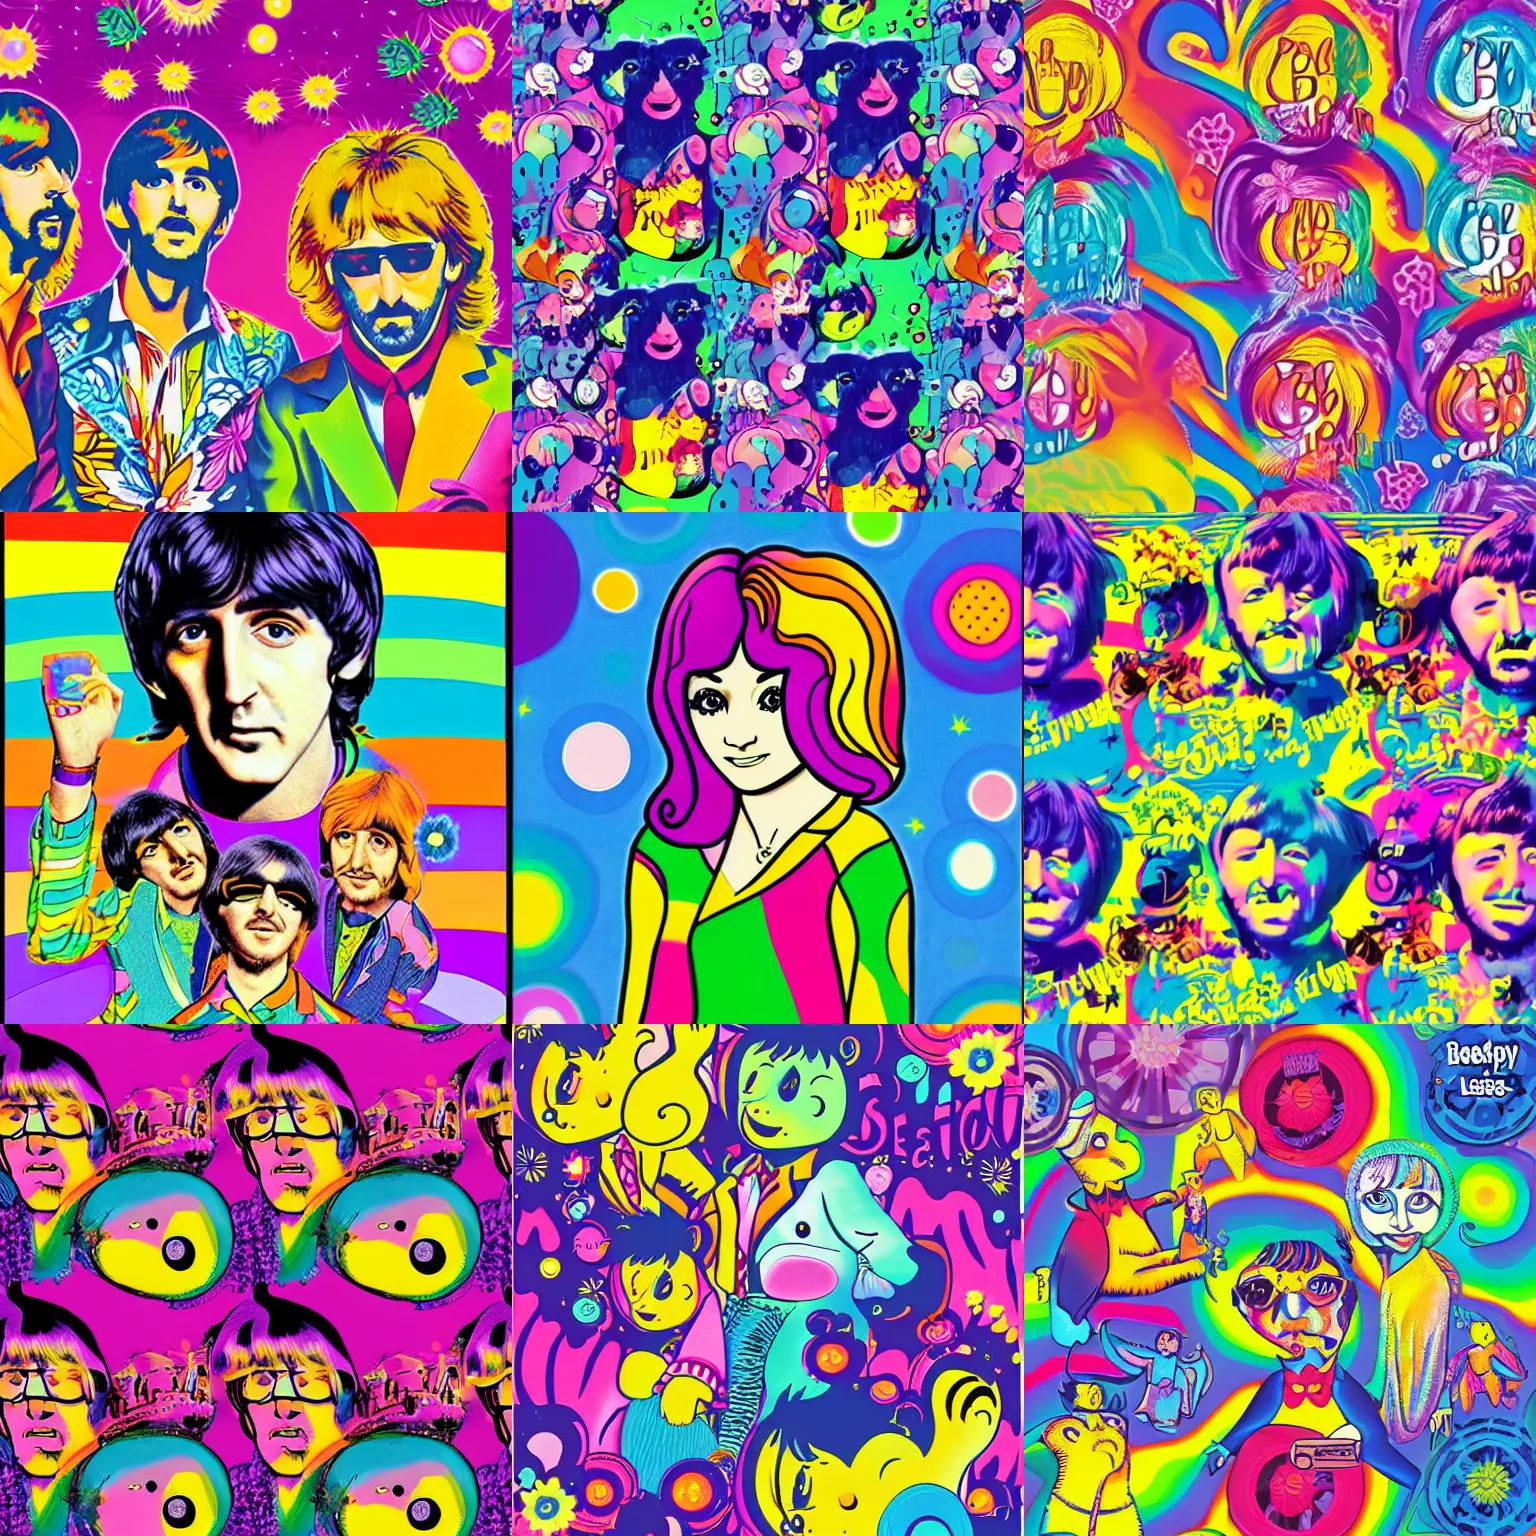 Prompt: yesterday by beatles illustrated by lisa frank